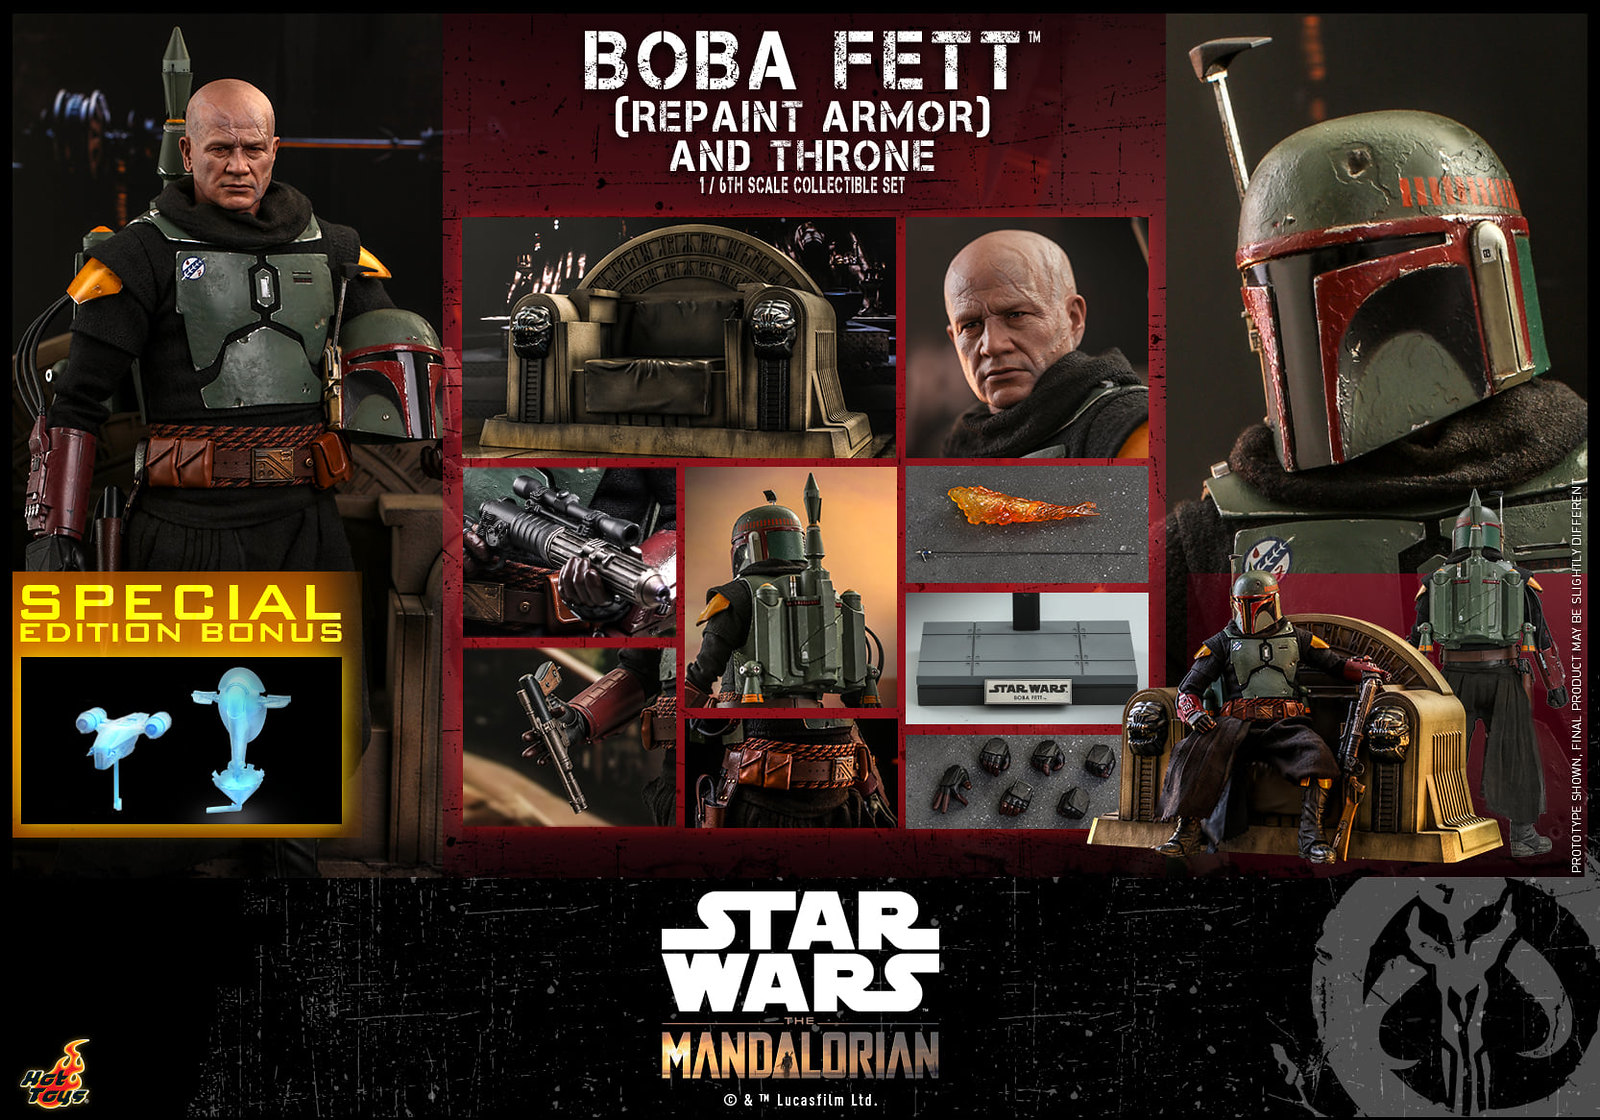 Star Wars: The Mandalorian™ - 1/6th scale Boba Fett™ (Repaint Armor) Collectible figure/ figure and Throne Collectible Set 51312297245_392fd24af8_h